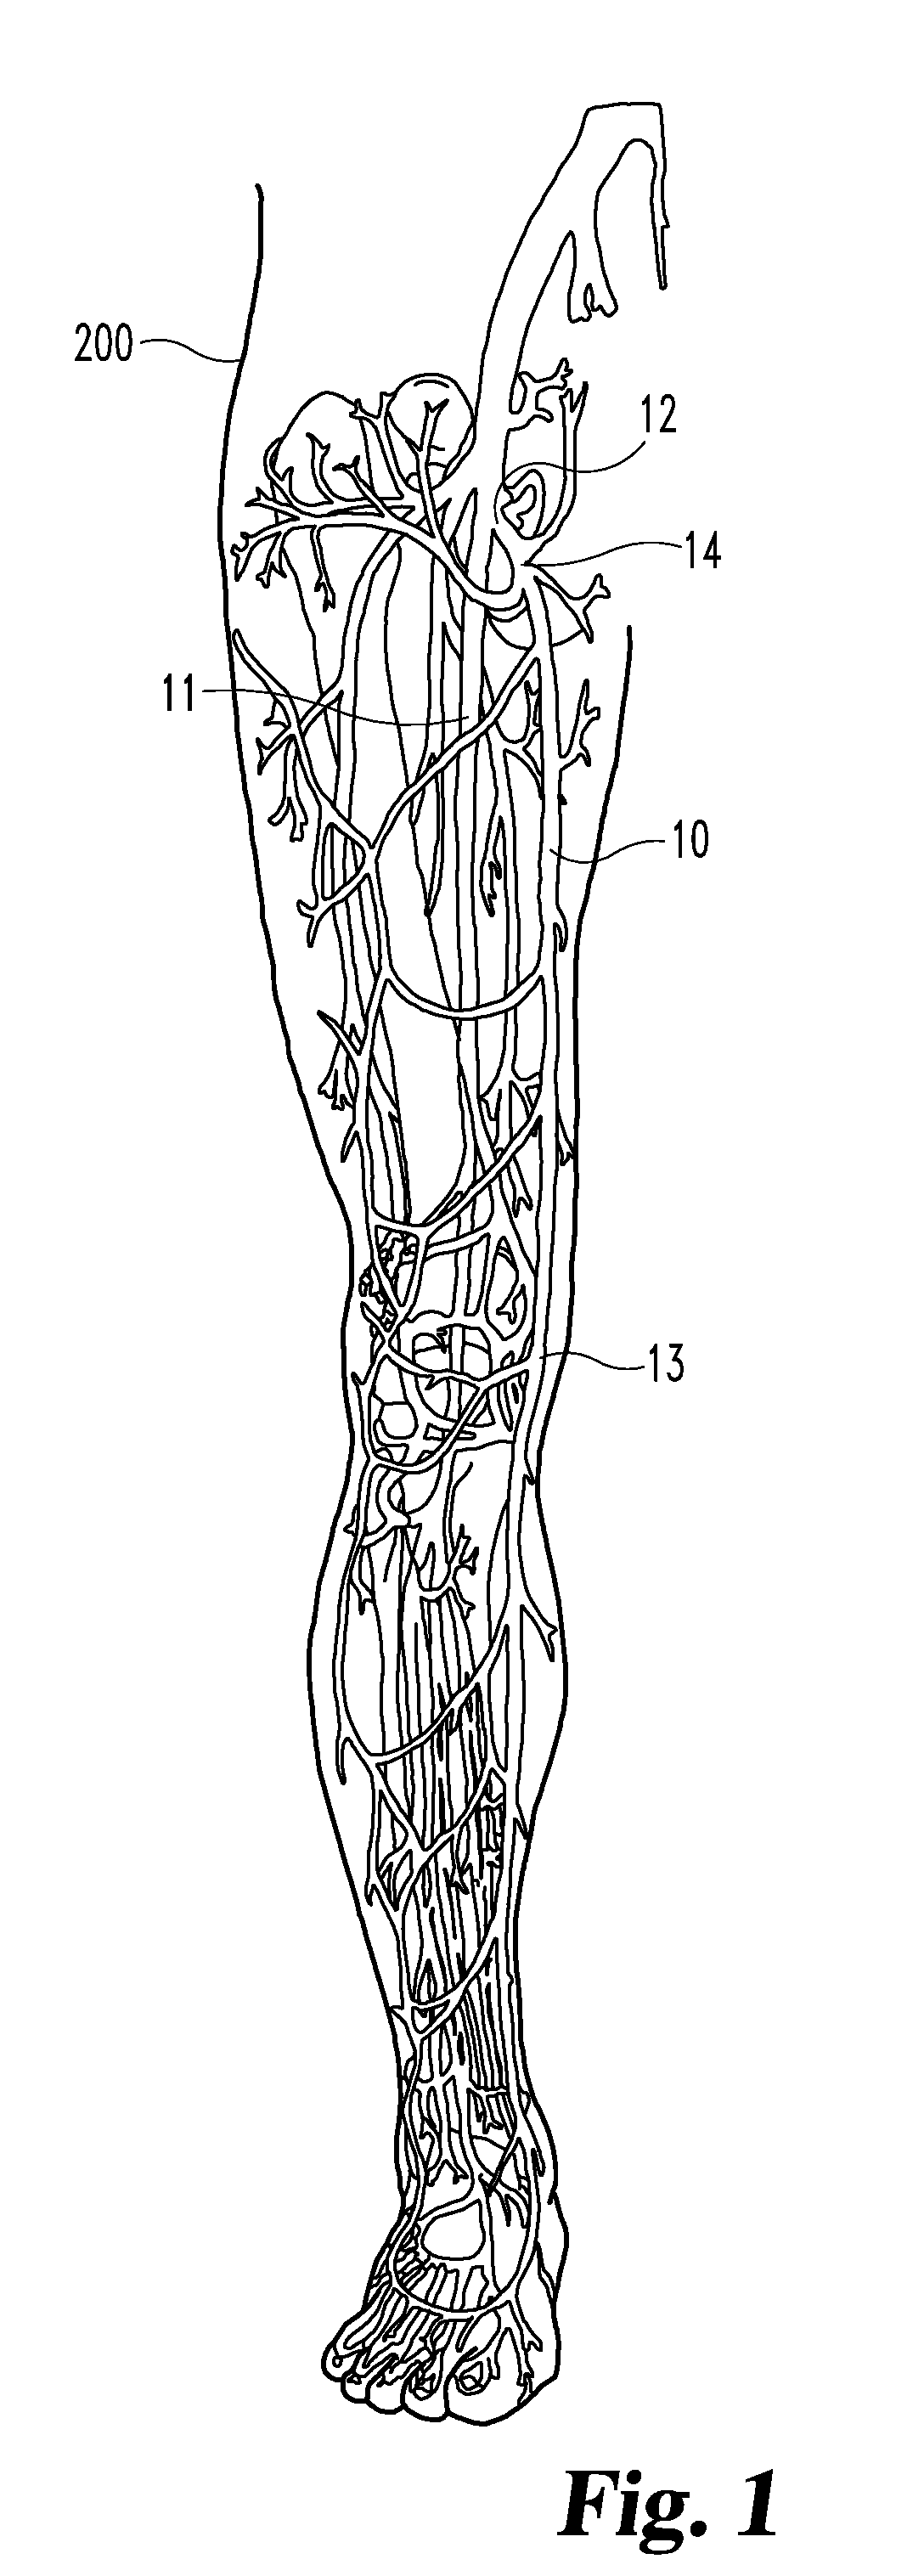 Inverting occlusion devices, methods, and systems